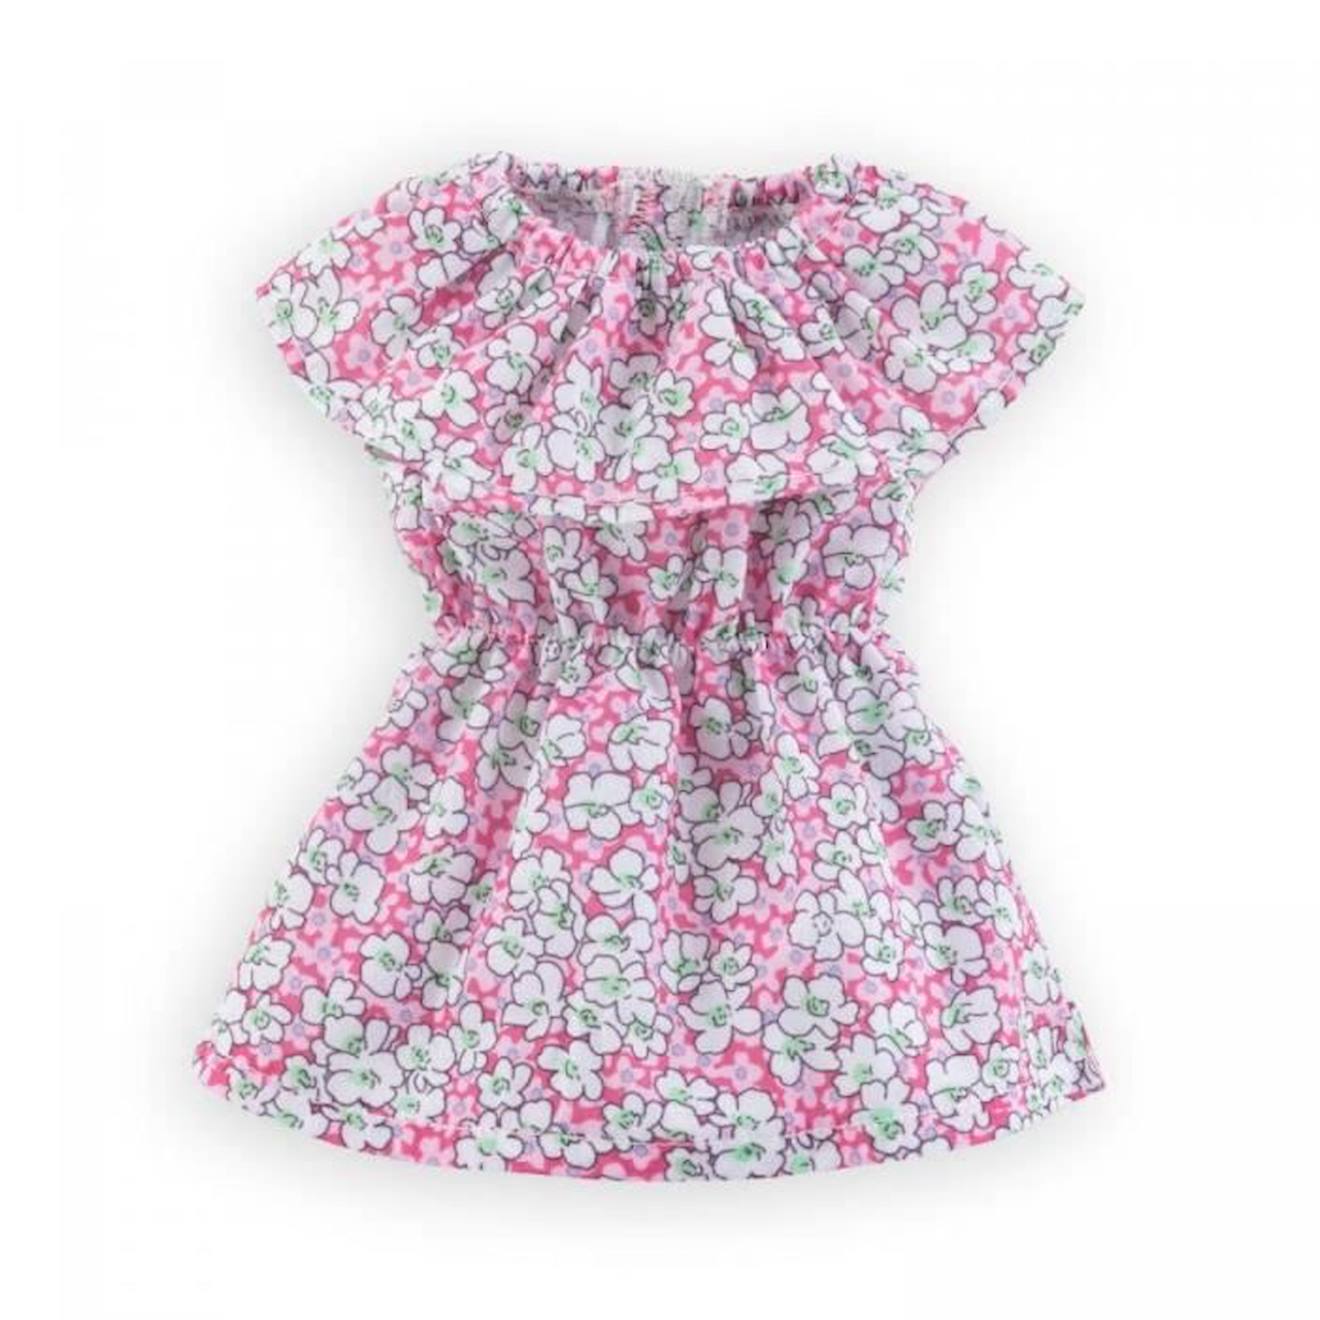 Robe Rose Fleurie Pour Poupée Ma Corolle - Corolle Rose